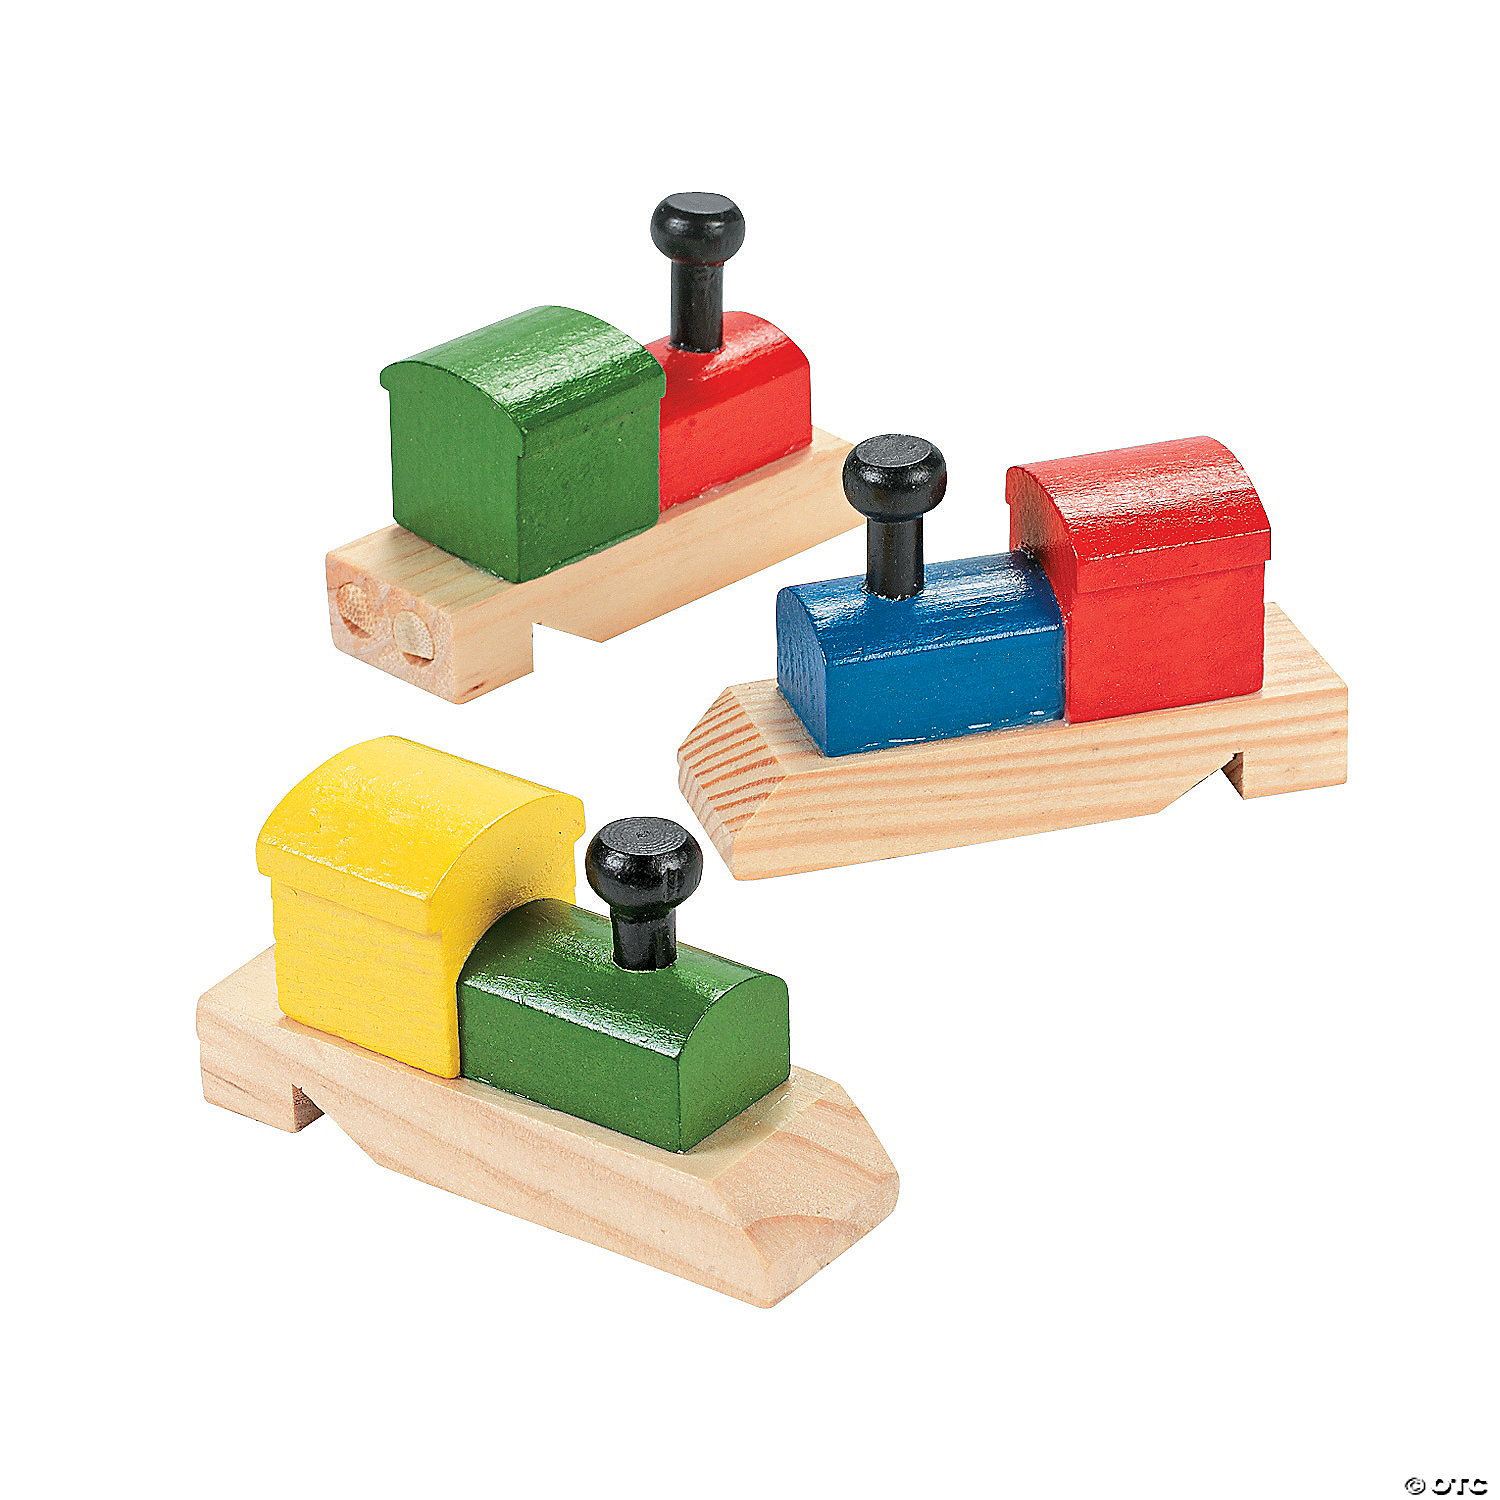 12 Pack Wooden Train Whistles 5.75 Printed On A Locomotive 